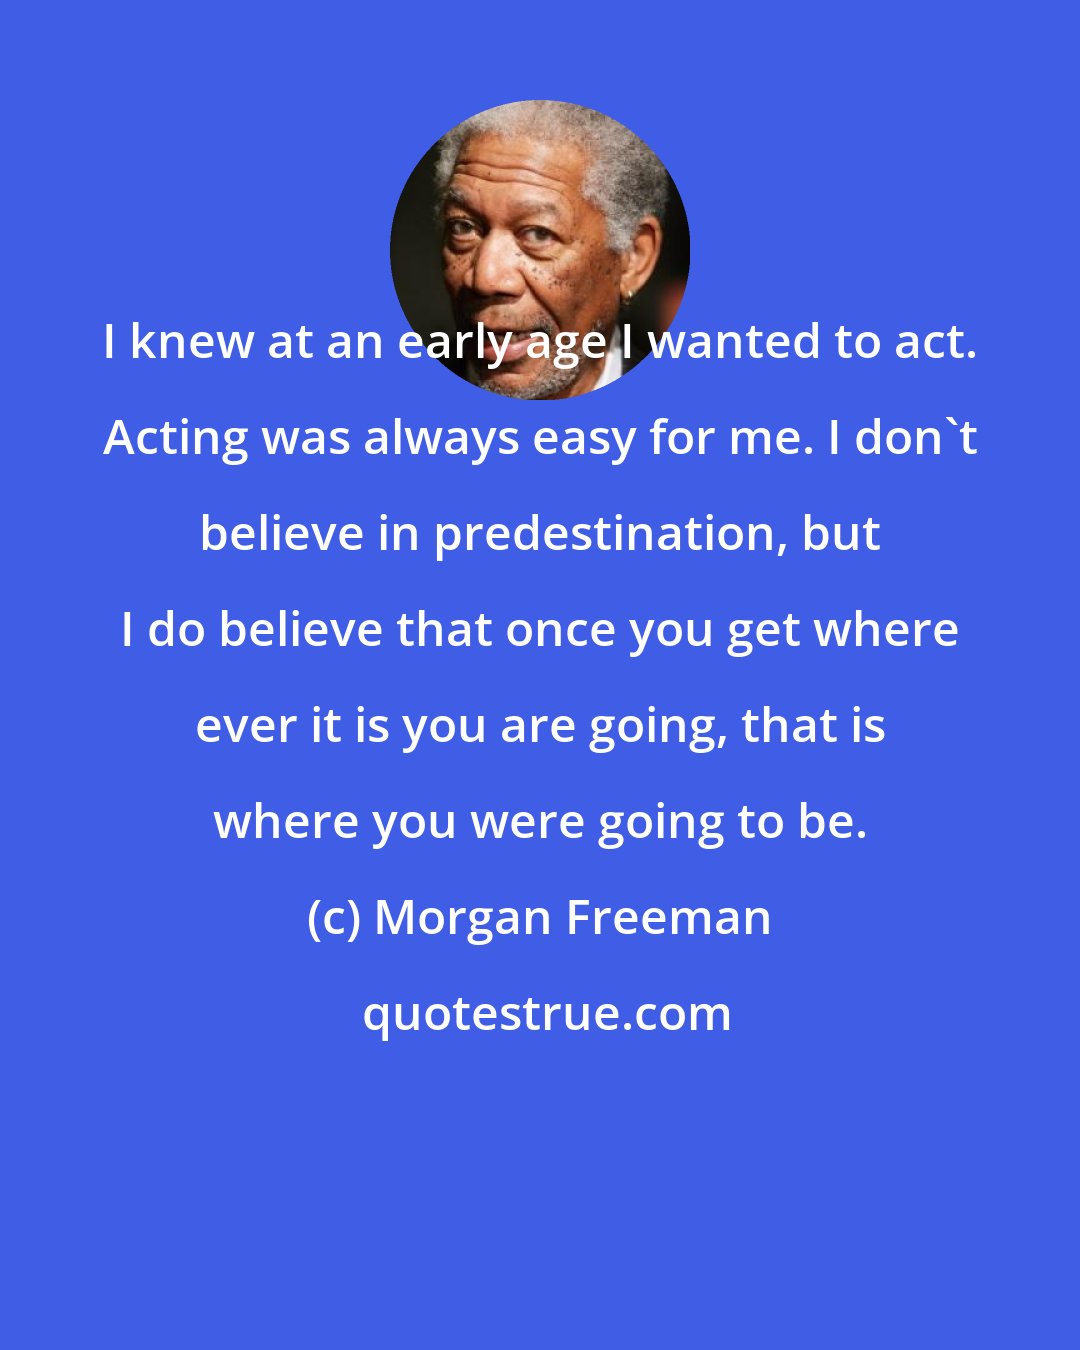 Morgan Freeman: I knew at an early age I wanted to act. Acting was always easy for me. I don't believe in predestination, but I do believe that once you get where ever it is you are going, that is where you were going to be.